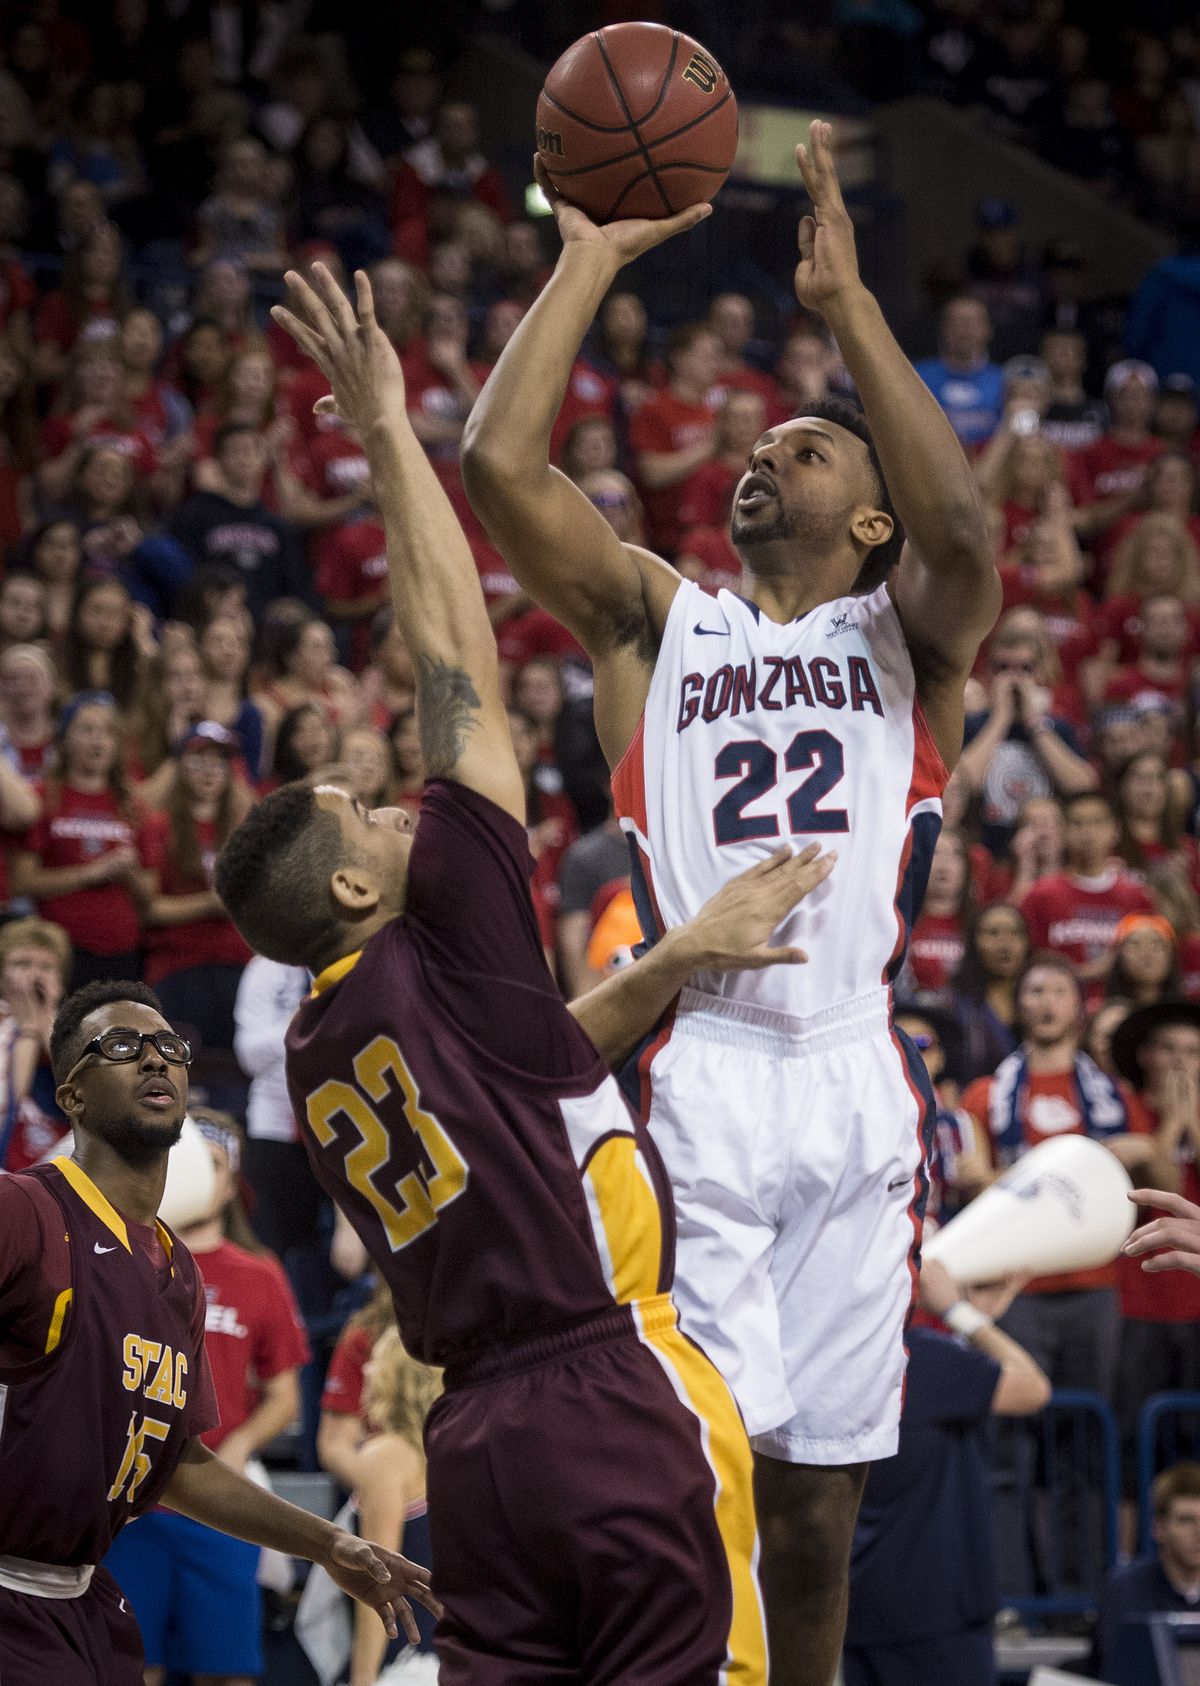 Gonzaga senior Byron Wesley, who played for three different coaches at USC, came to Gonzaga as graduate transfer. (Colin Mulvany)